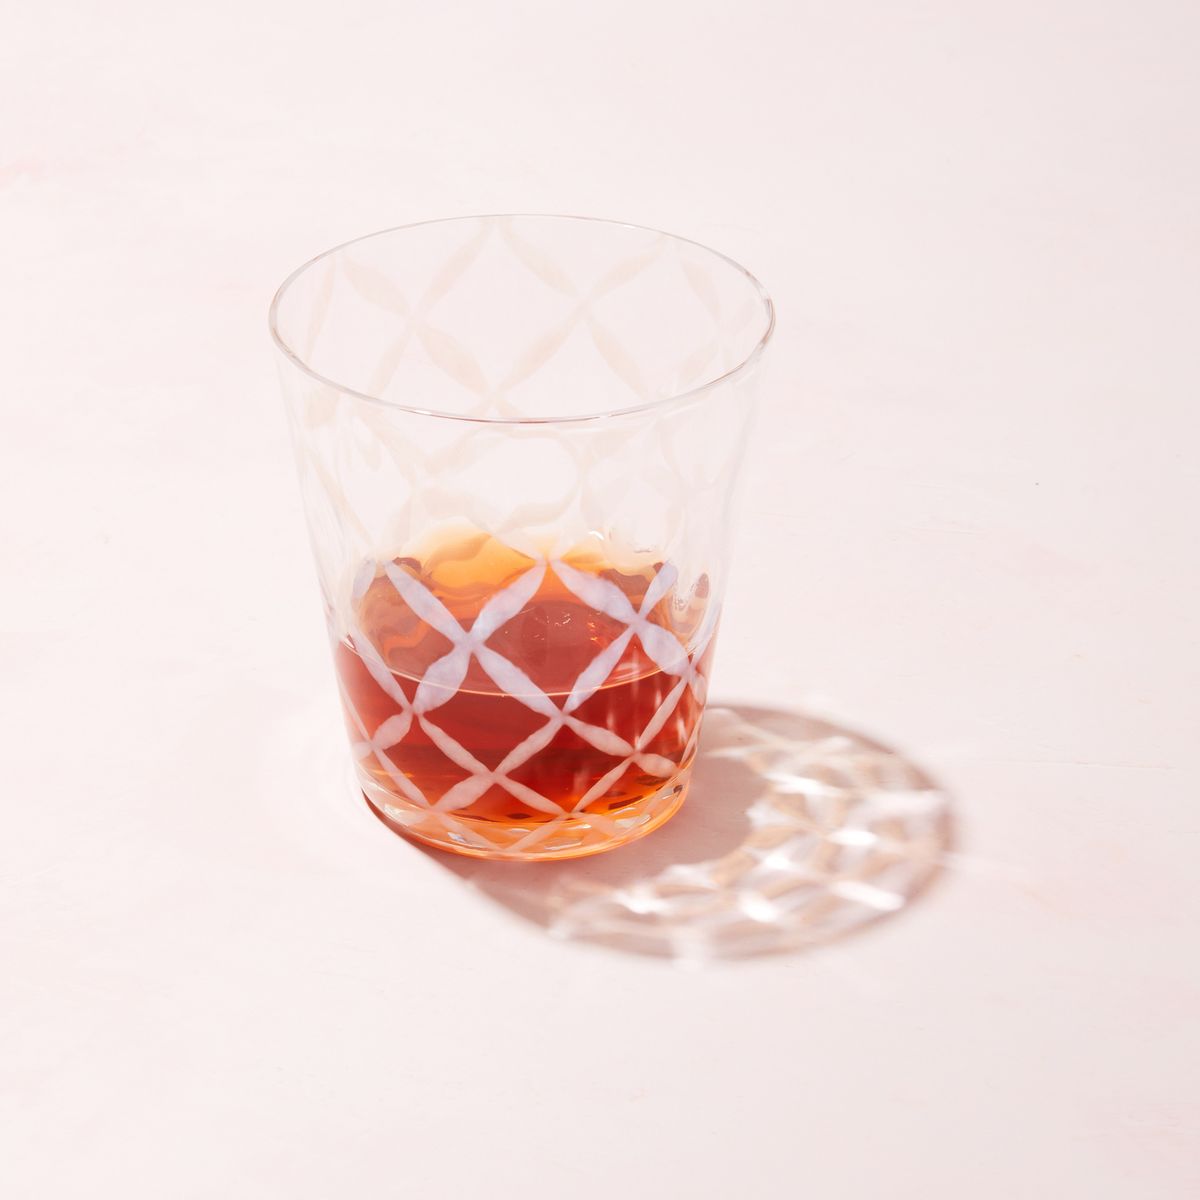 A short clear glass with a delicate grid pattern, half filled with drink and casting a shadow